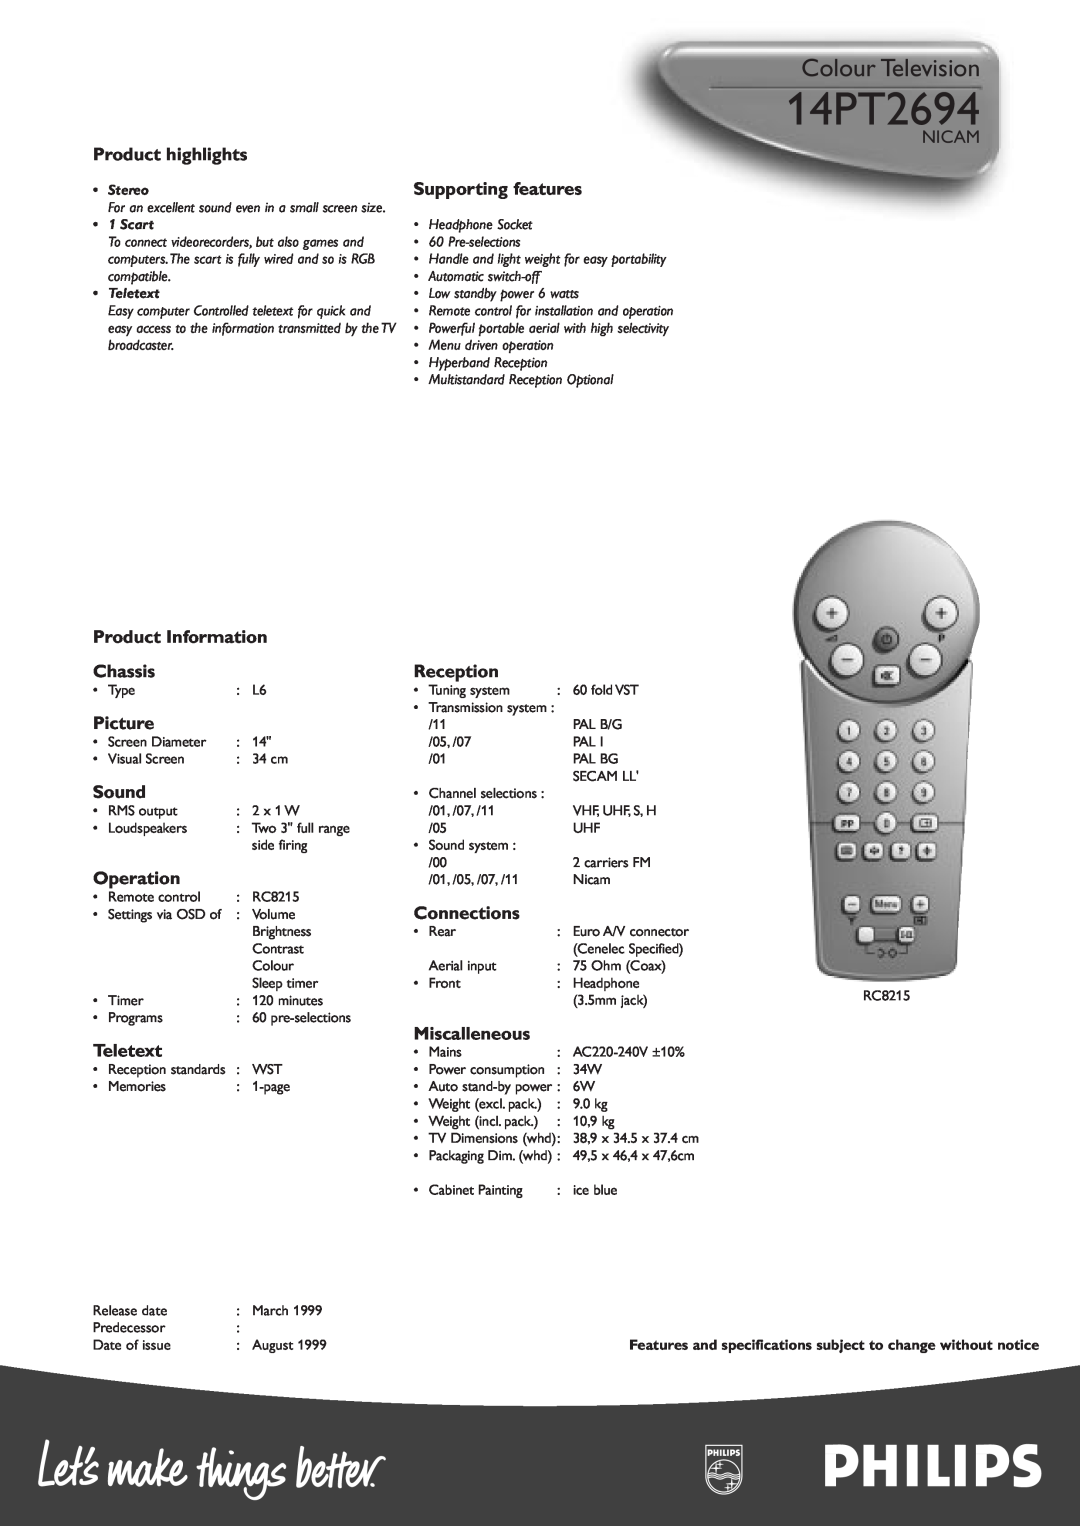 Philips 14PT2694 manual Colour Television, Product highlights 